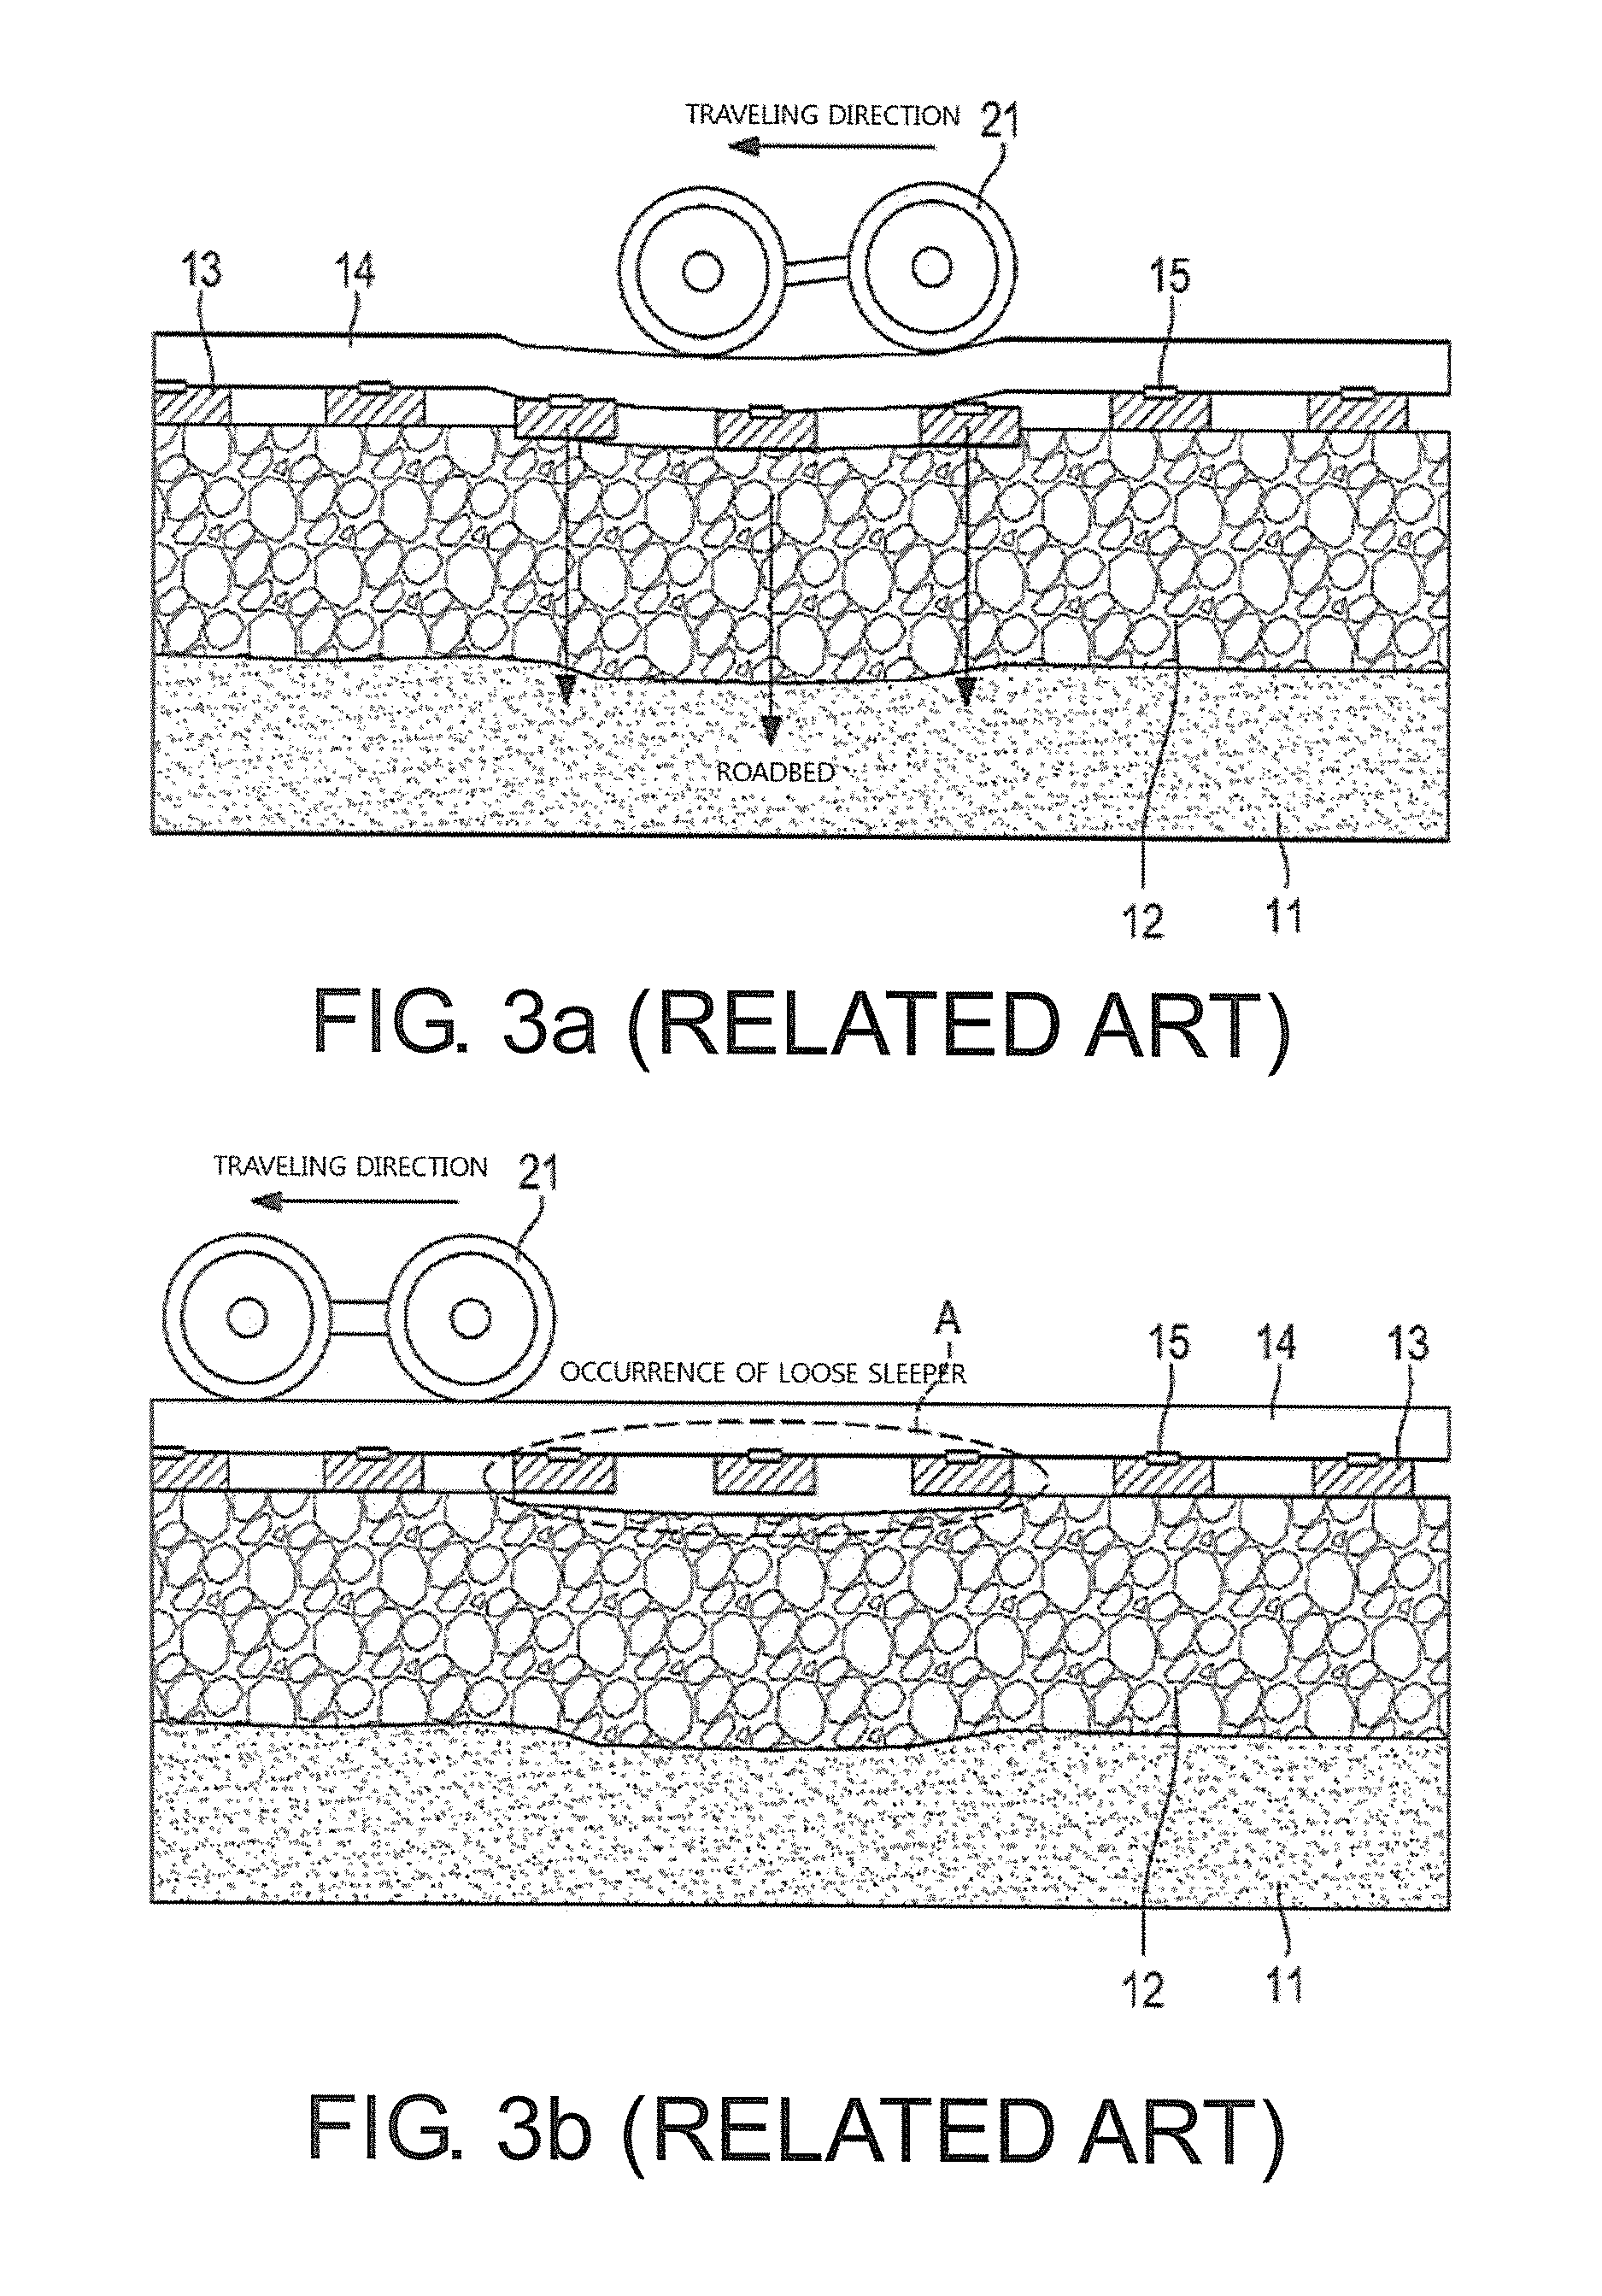 Rail tie having embedded automatic differential settlement compensation apparatus using oil pressure for railroad tracks